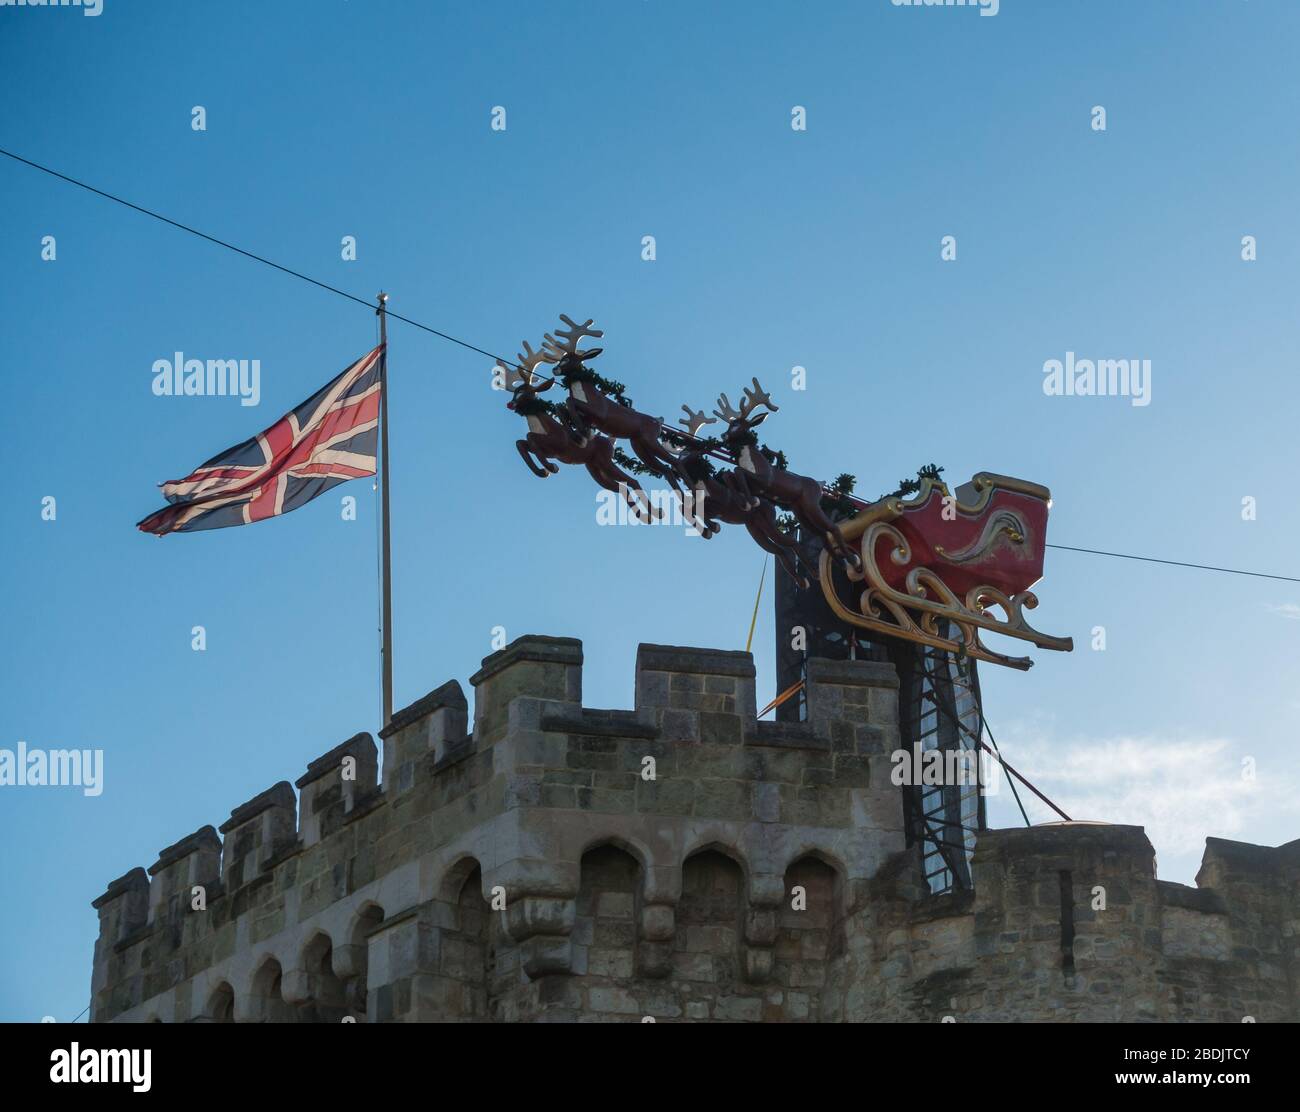 Southampton / UK - 14th December 2019: A shot of reigndeer pulling a sleigh atop the bargate in Southampton city centre at Christmastime. Stock Photo